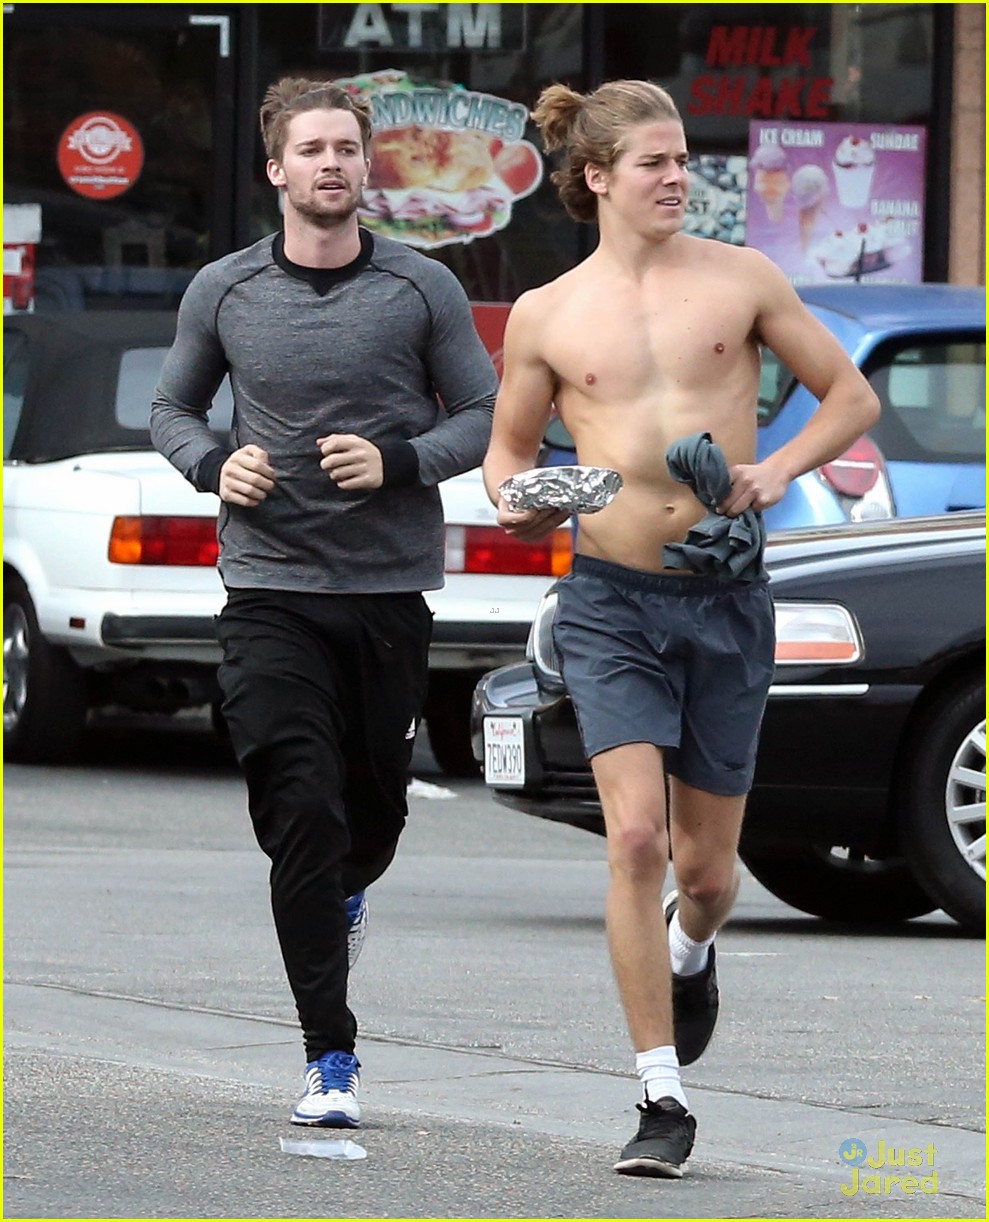 Patrick Schwarzenegger & Shirtless Friend Grab Our Attention During ...